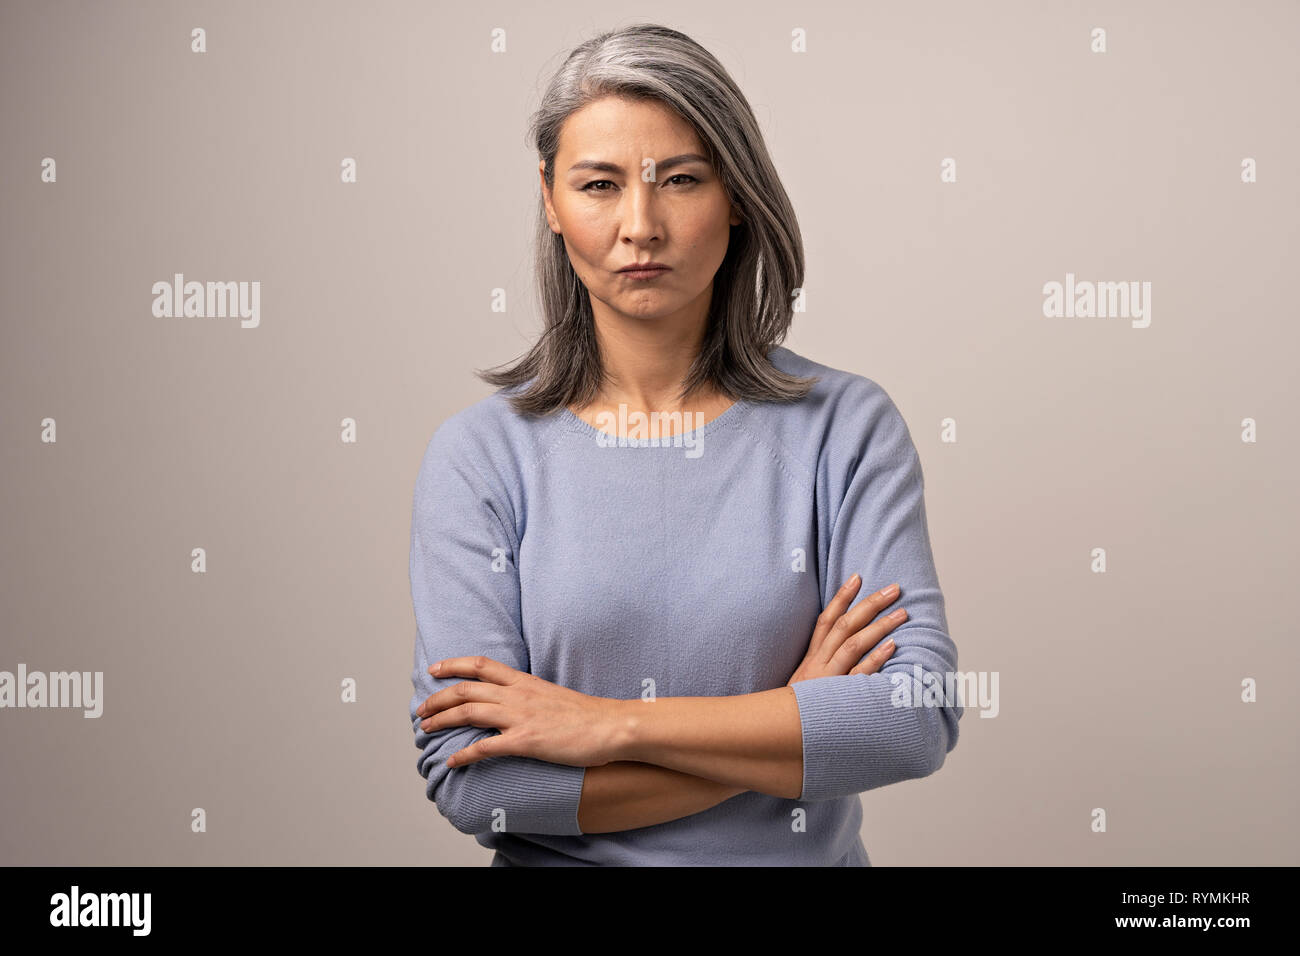 Serious Mongolian Woman with Gray Hair Against the Backdrop of Gray. Stock Photo